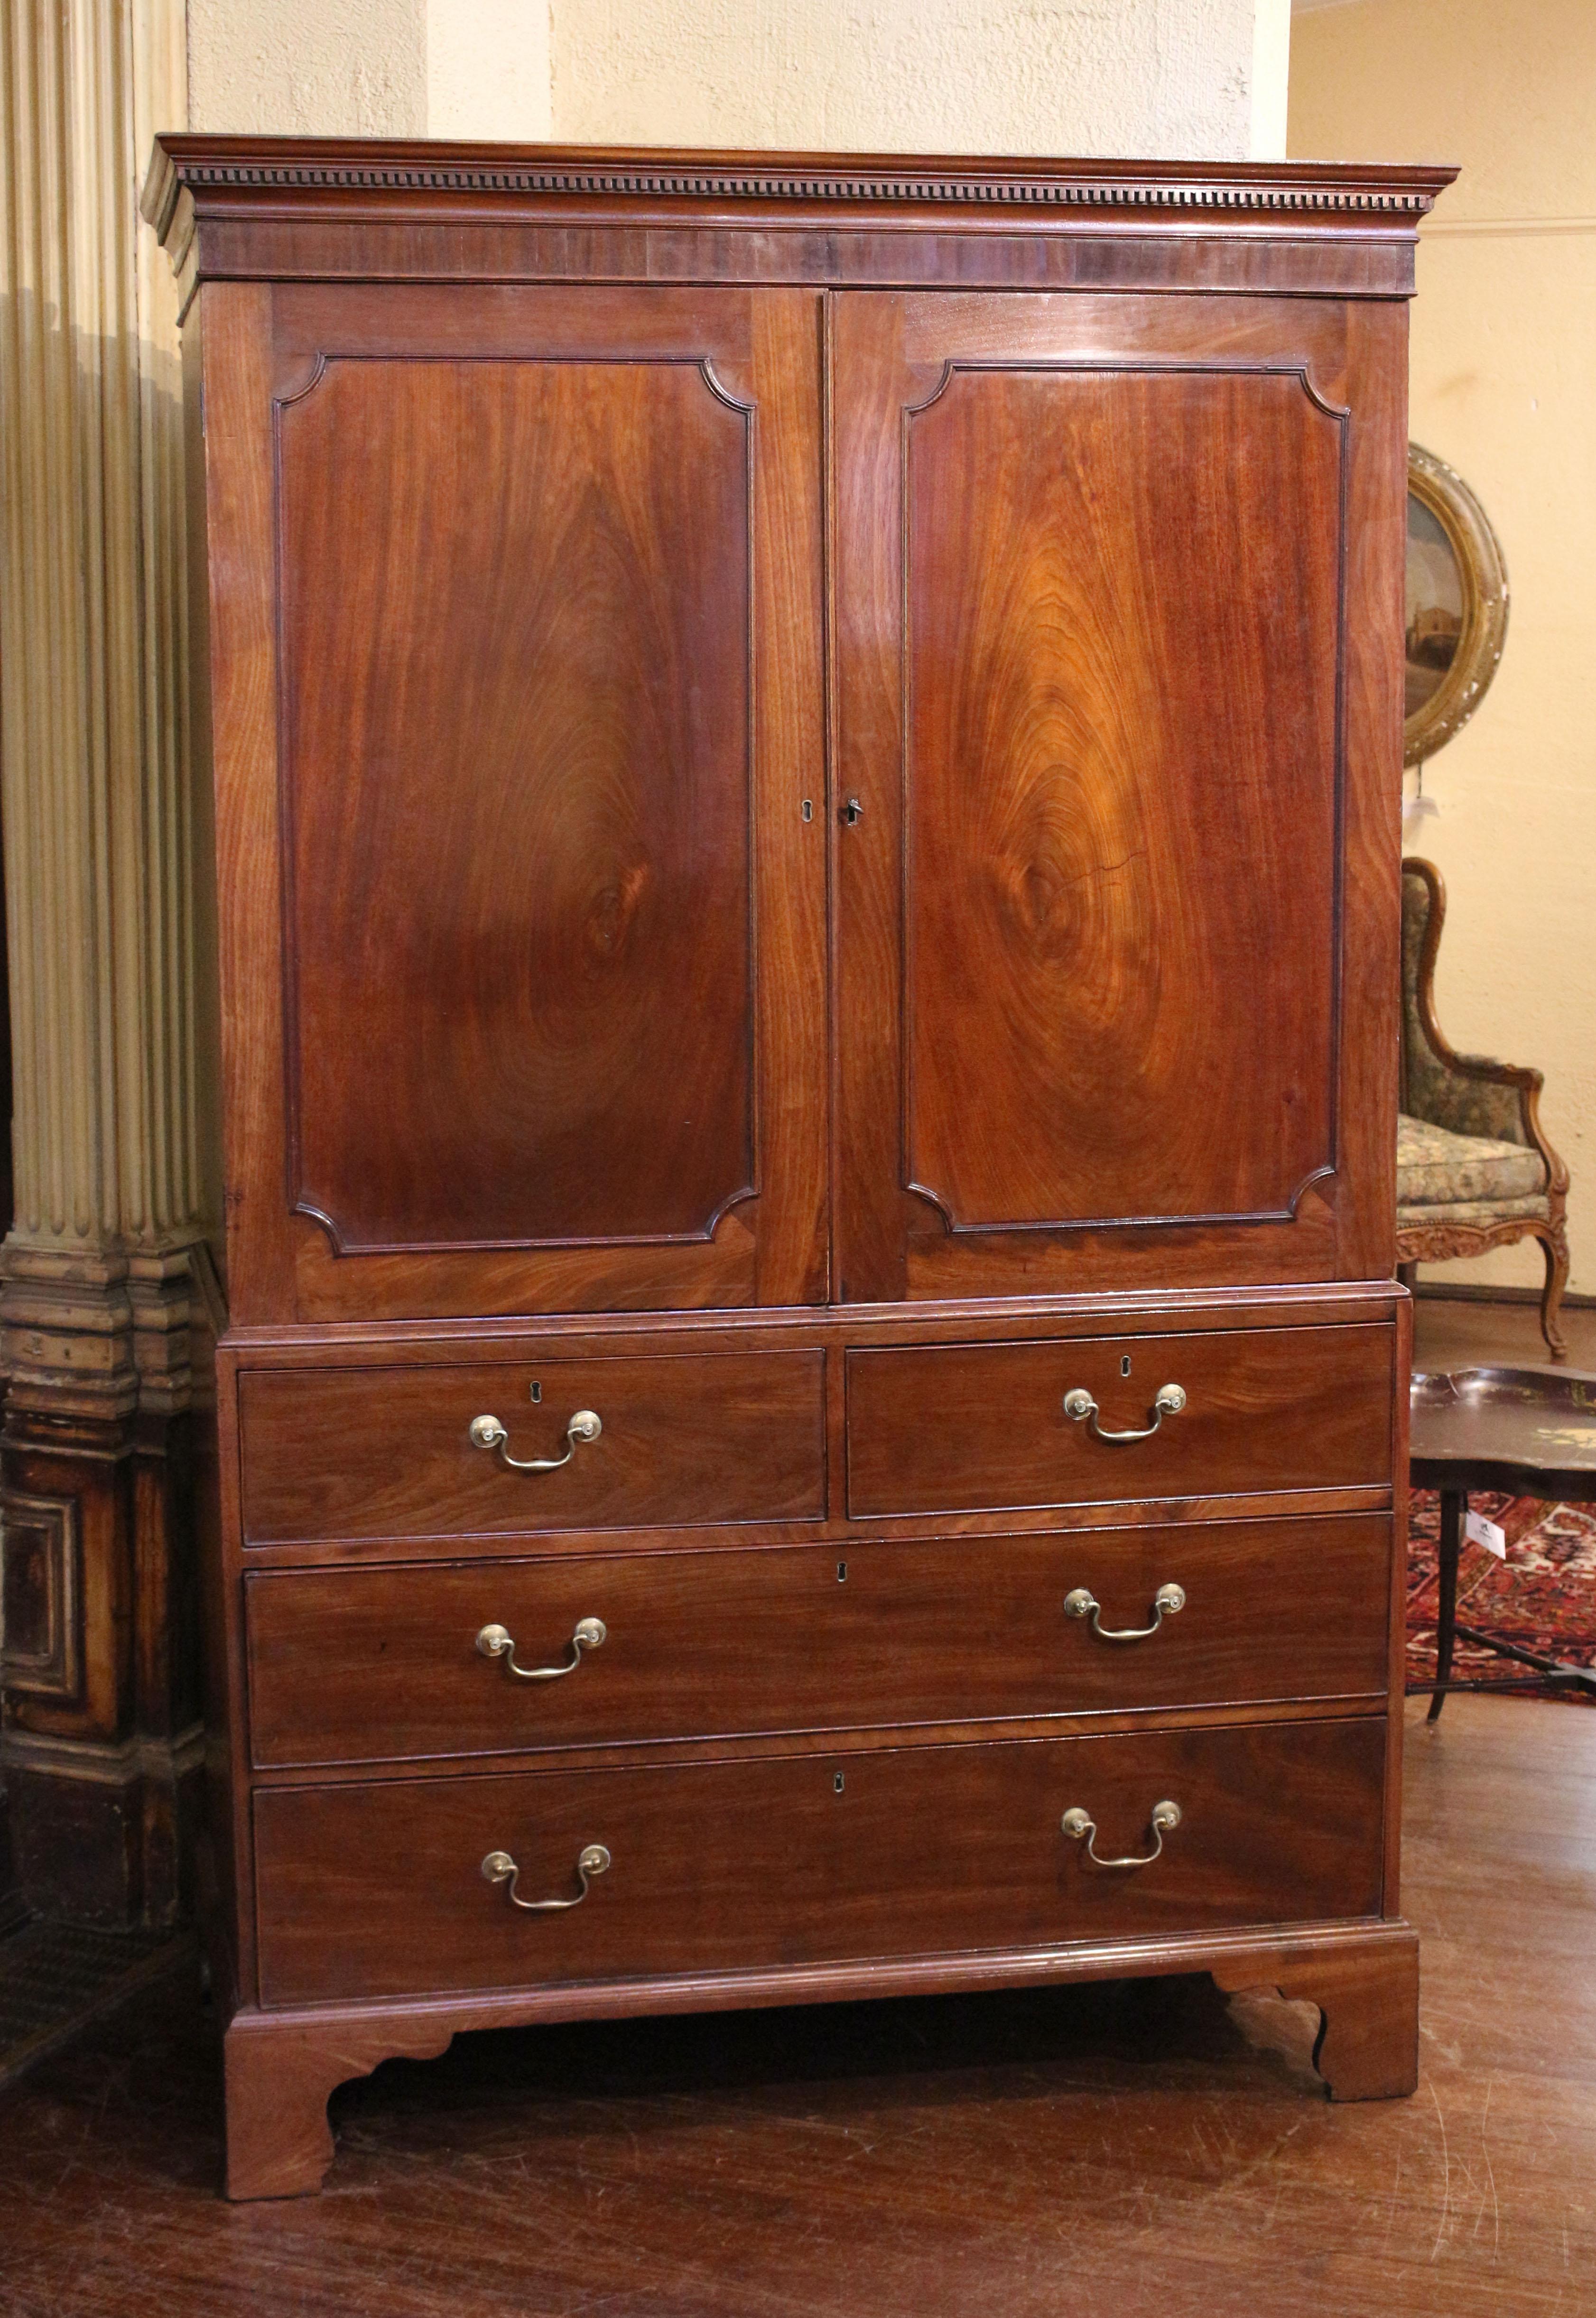 Circa 1780 George III period linen press, English. Cavetto corner molded doors enclosing a rank of 5 linen slides over 2 short over 2 long drawers raised on bold, shaped bracket feet. The whole surmounted by a dentil molded crown. Mahogany with oak